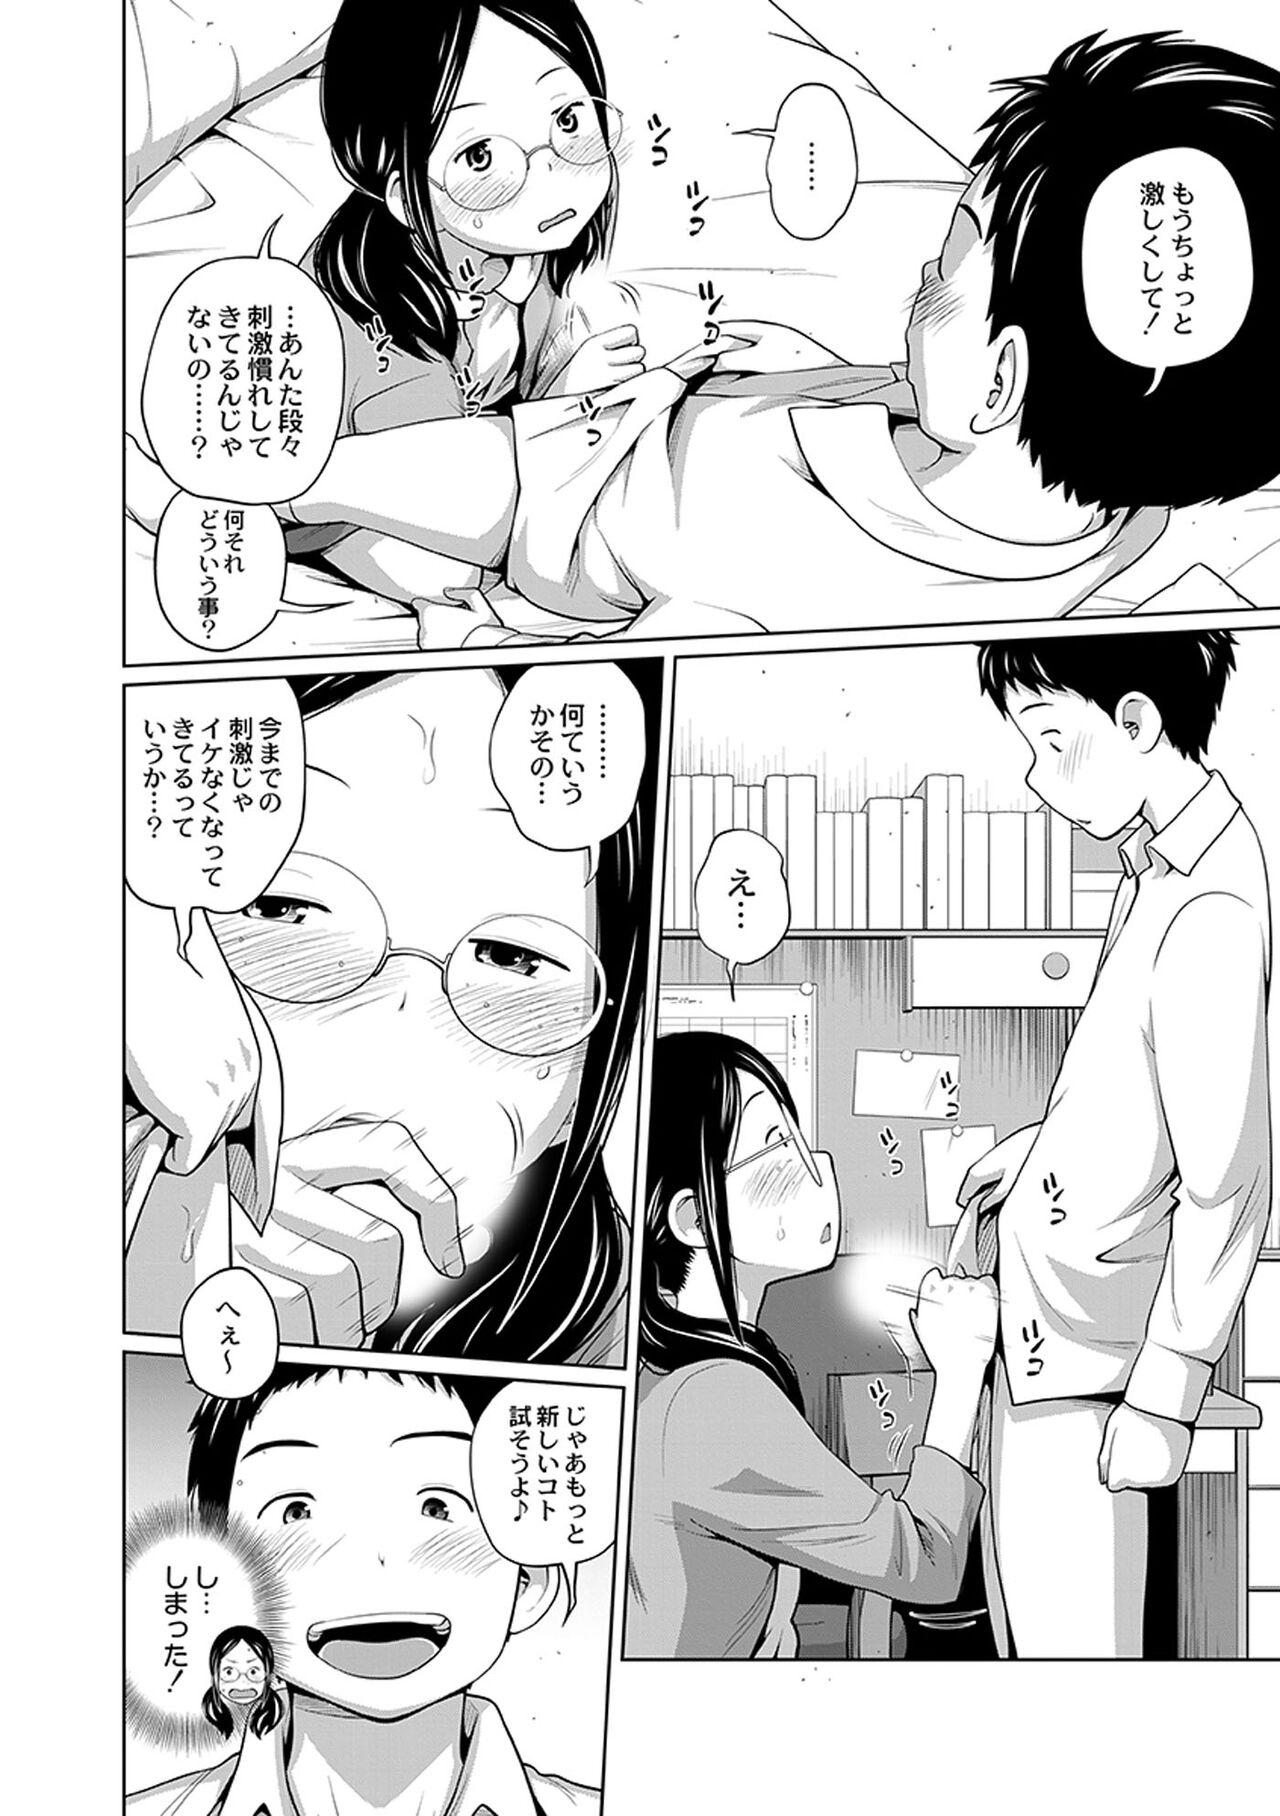 Mexico Ane Megane - spectacled sister Amateurs - Page 8